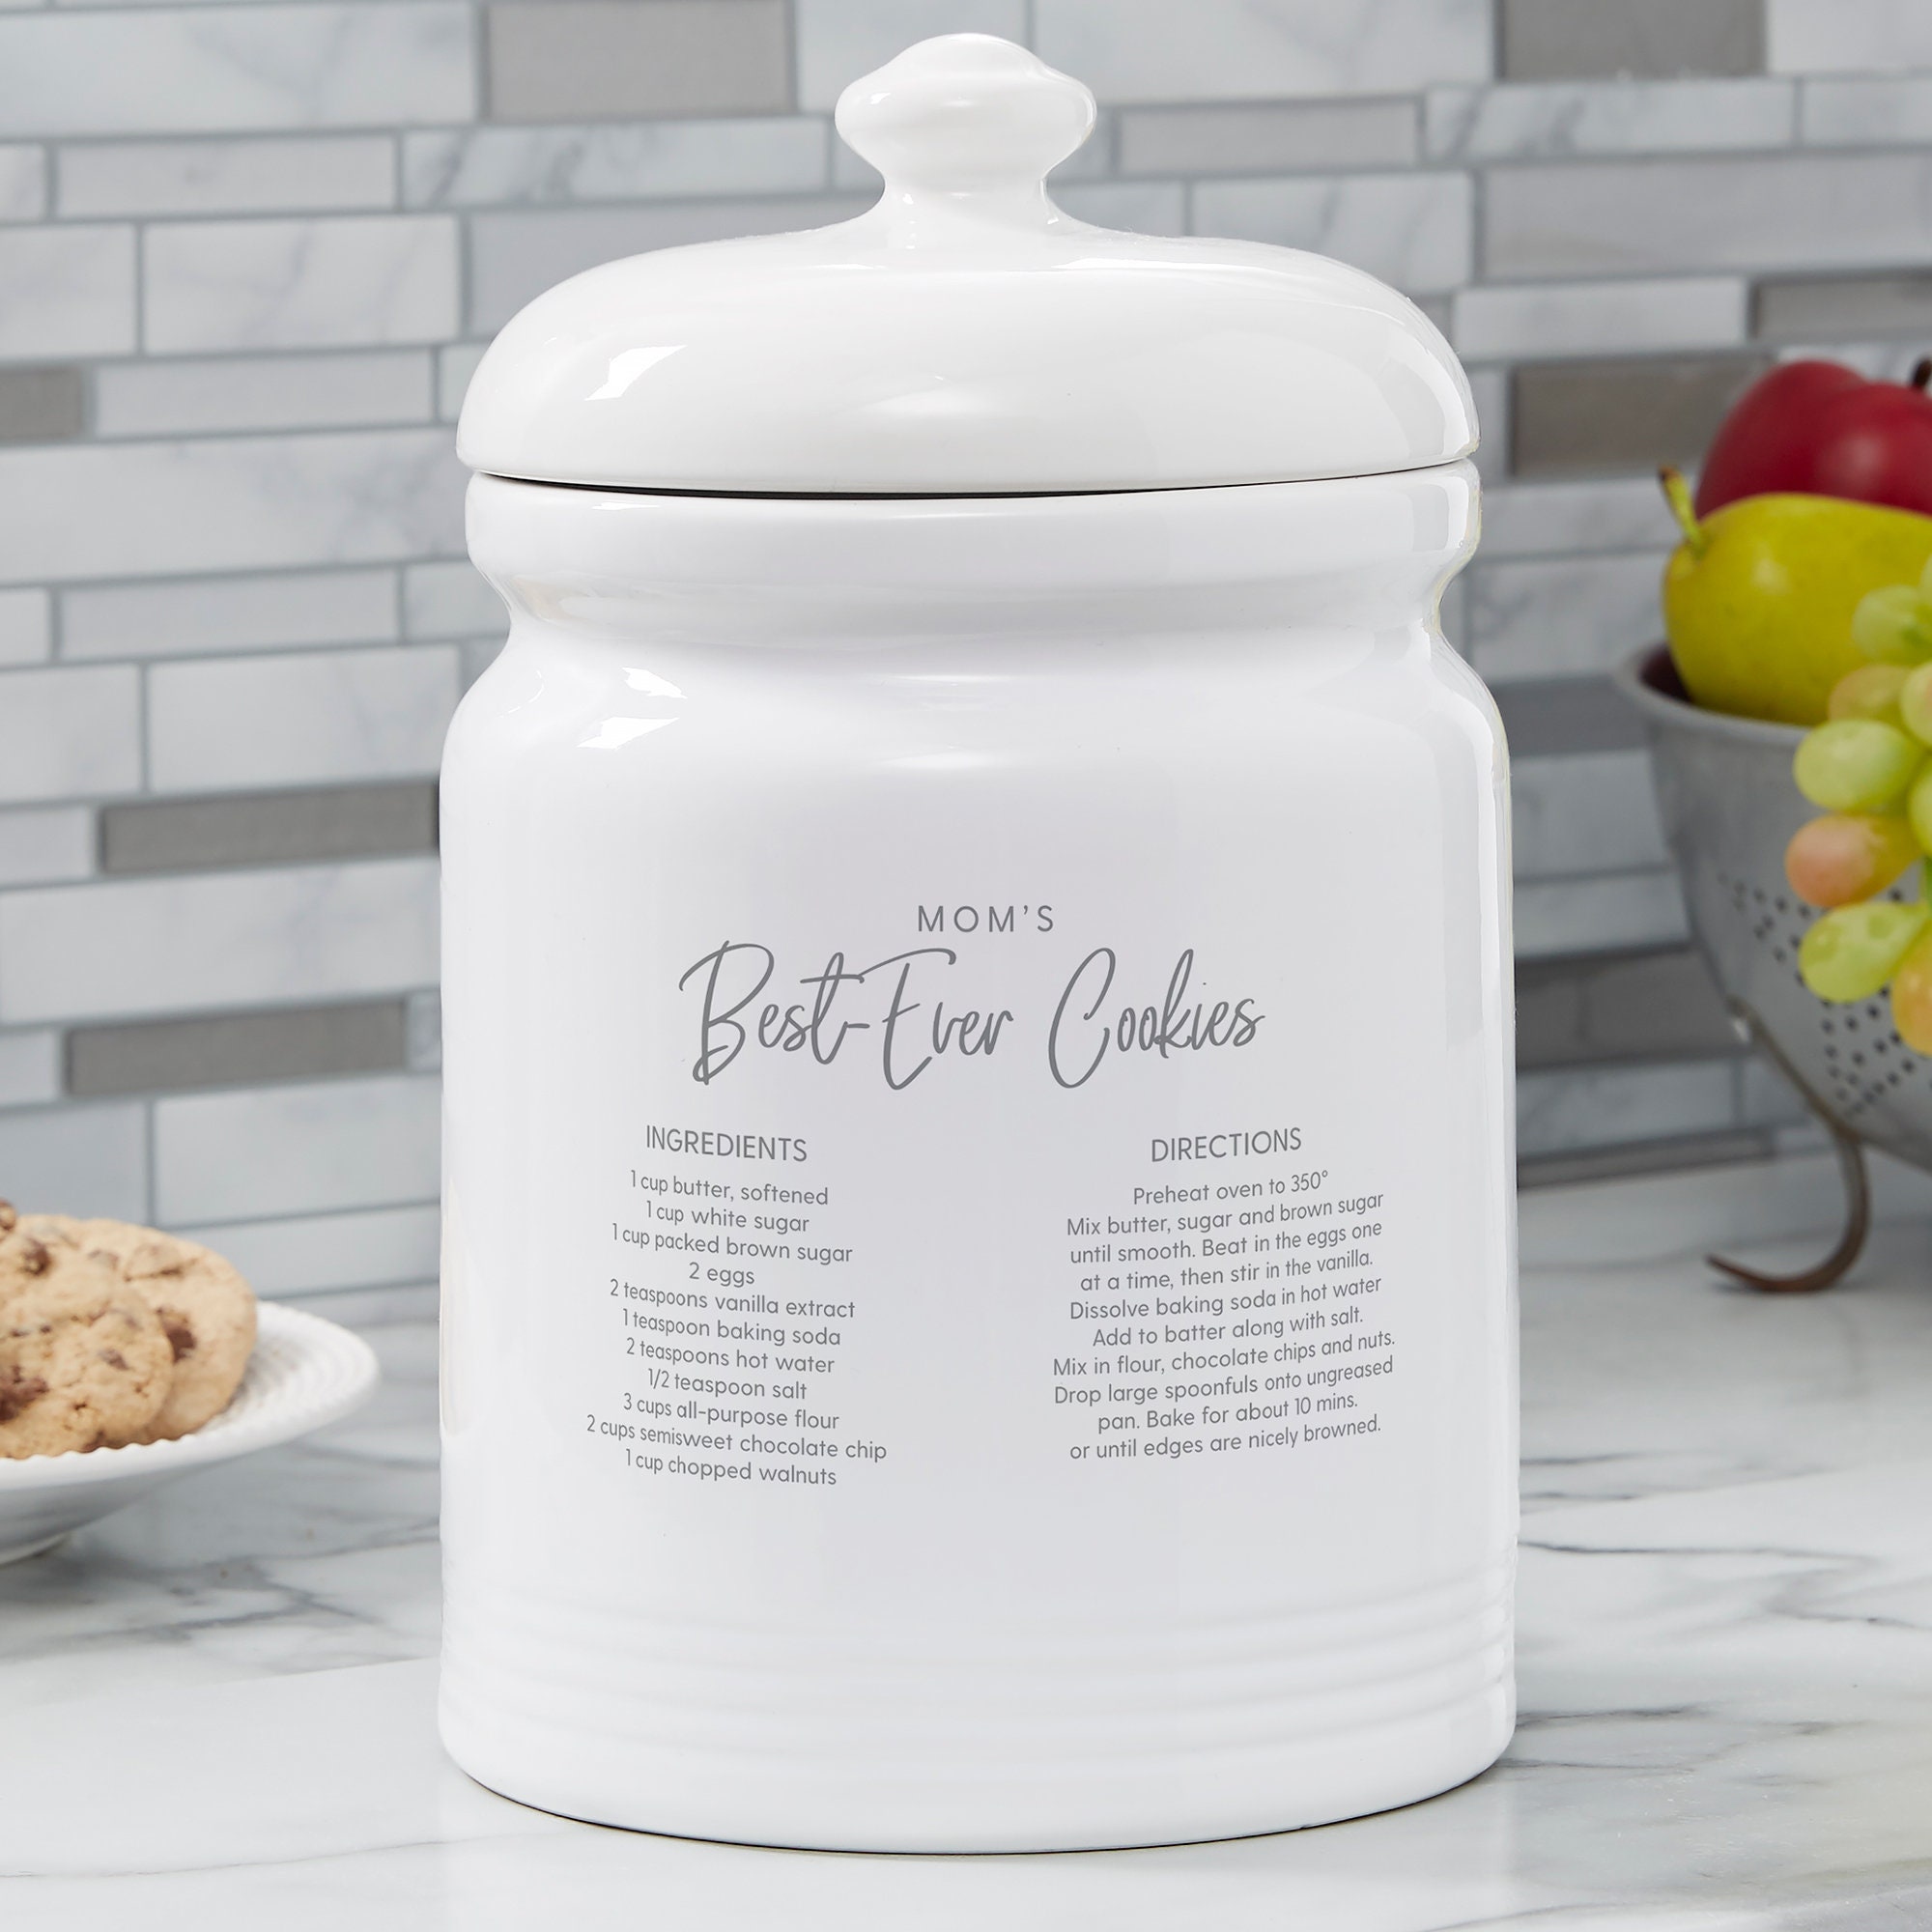 Unique and Large Cookie Jars with Gift Box Airtight Ceramic Cookie  Containers